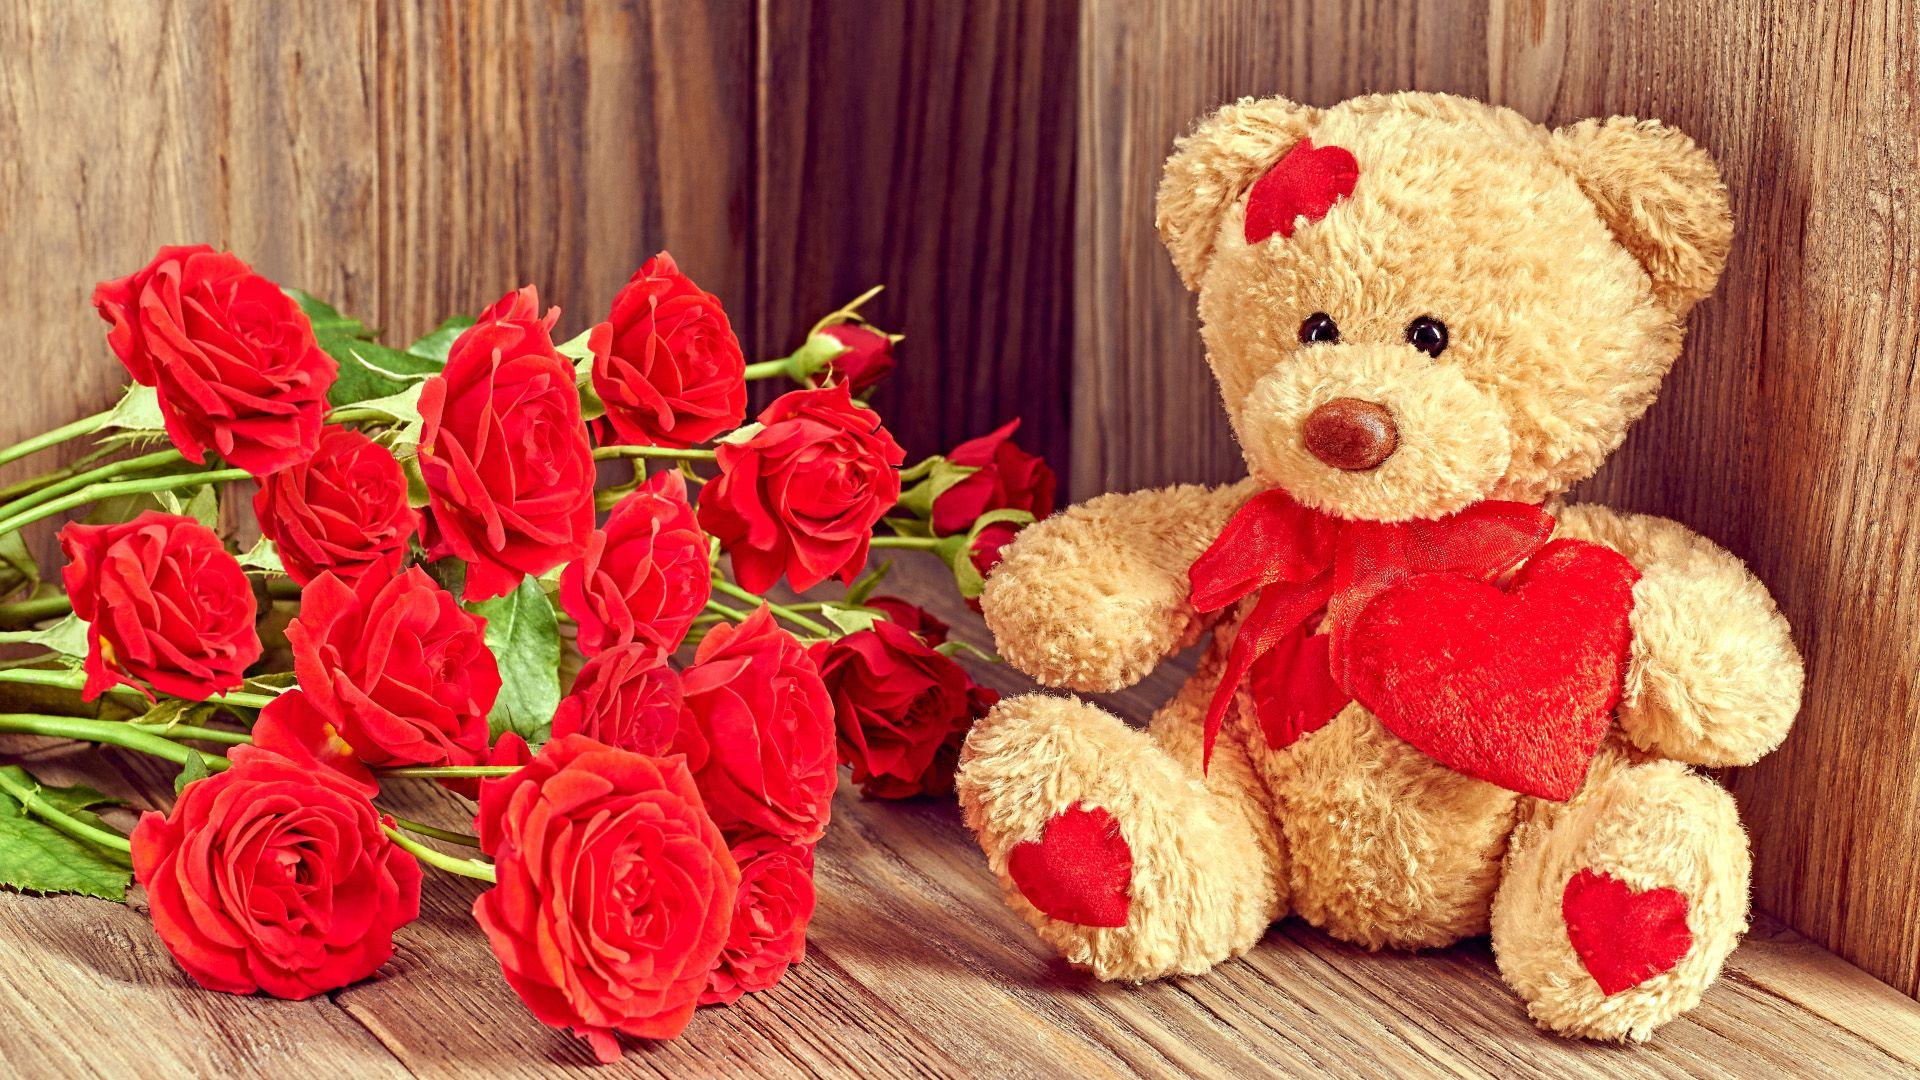 Cute and Romantic Wallpaper with Teddy Bear Image Download. HD